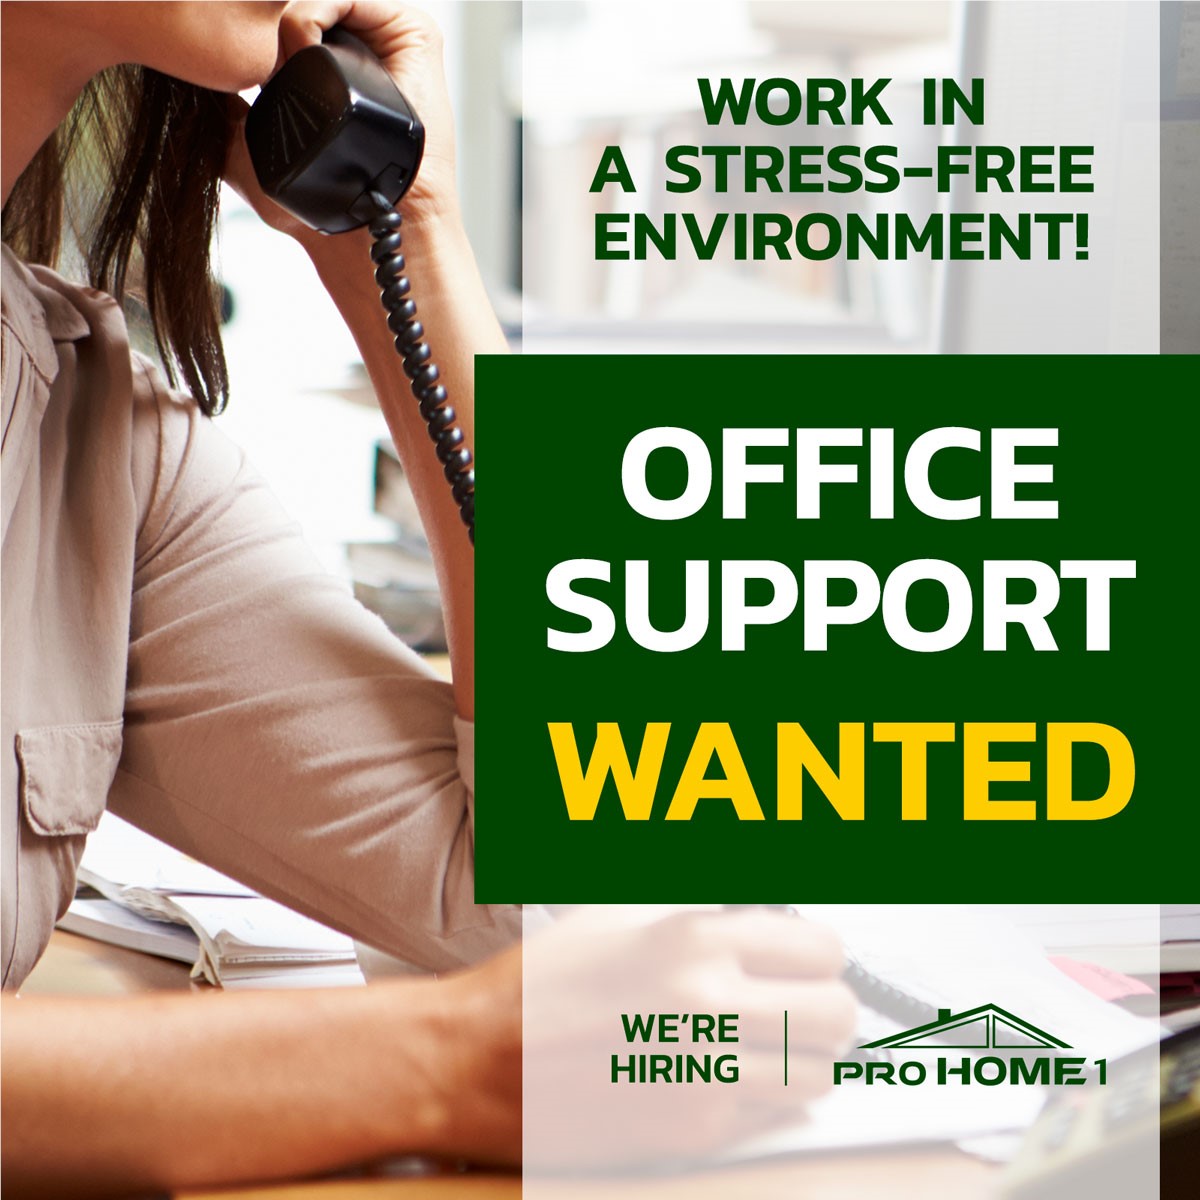 We Are Hiring! A Full-time Office Support Needed!